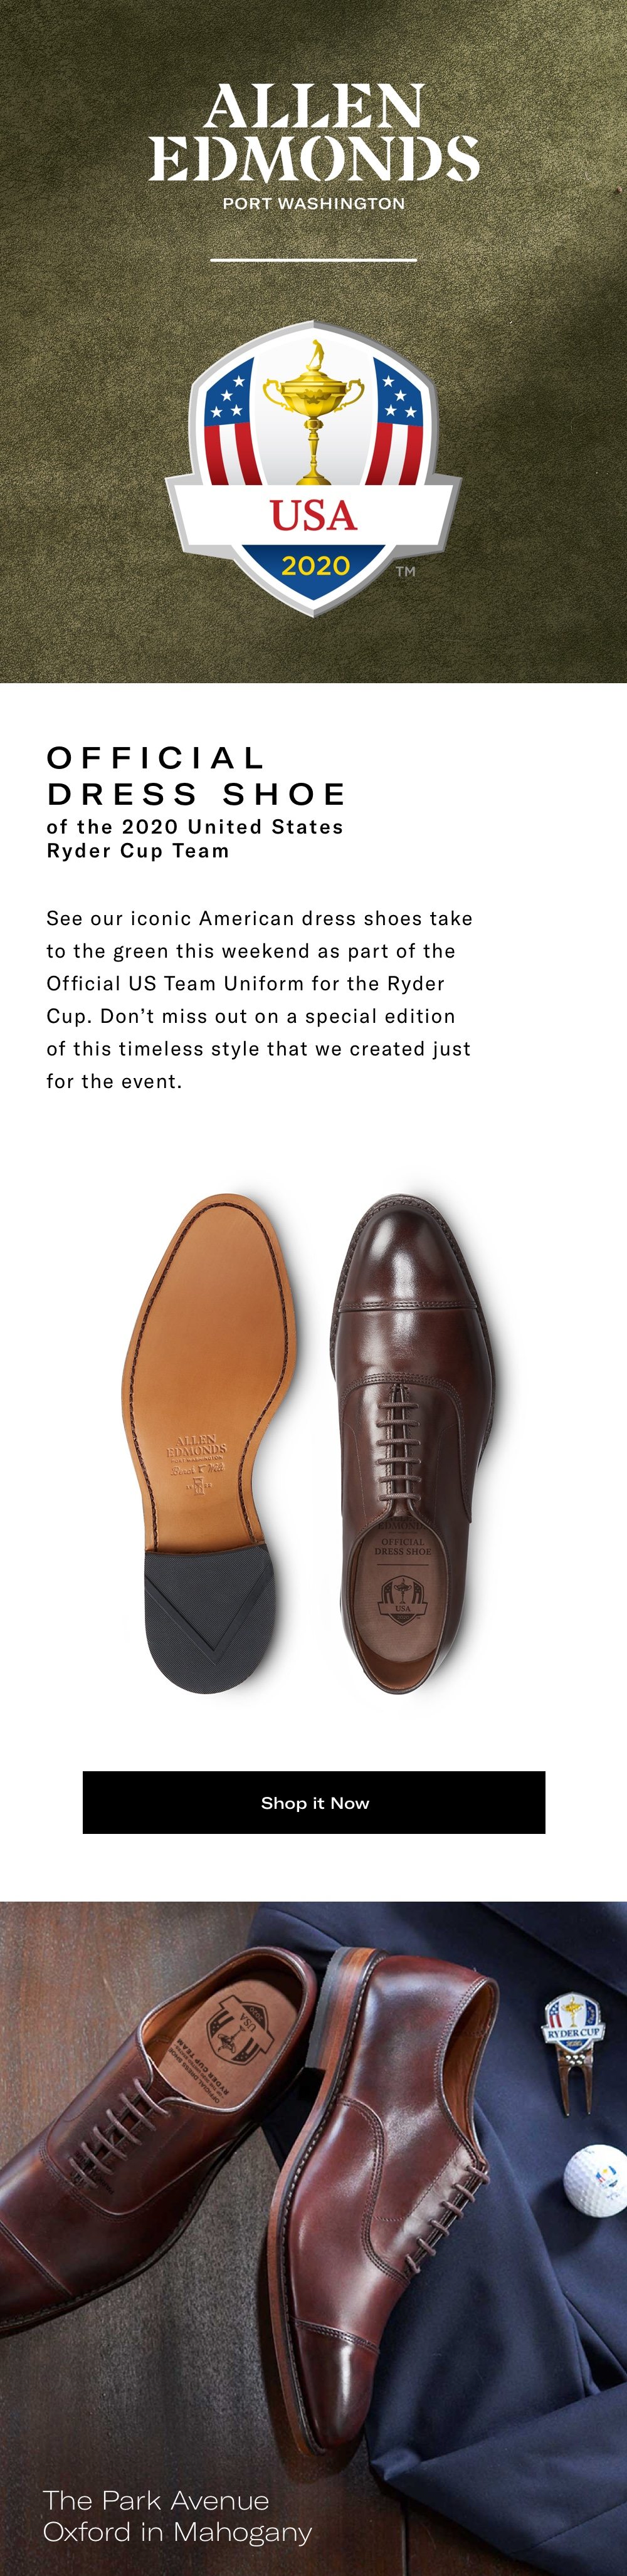 Official Dress Shoe of the 2020 US Ryder Cup Team